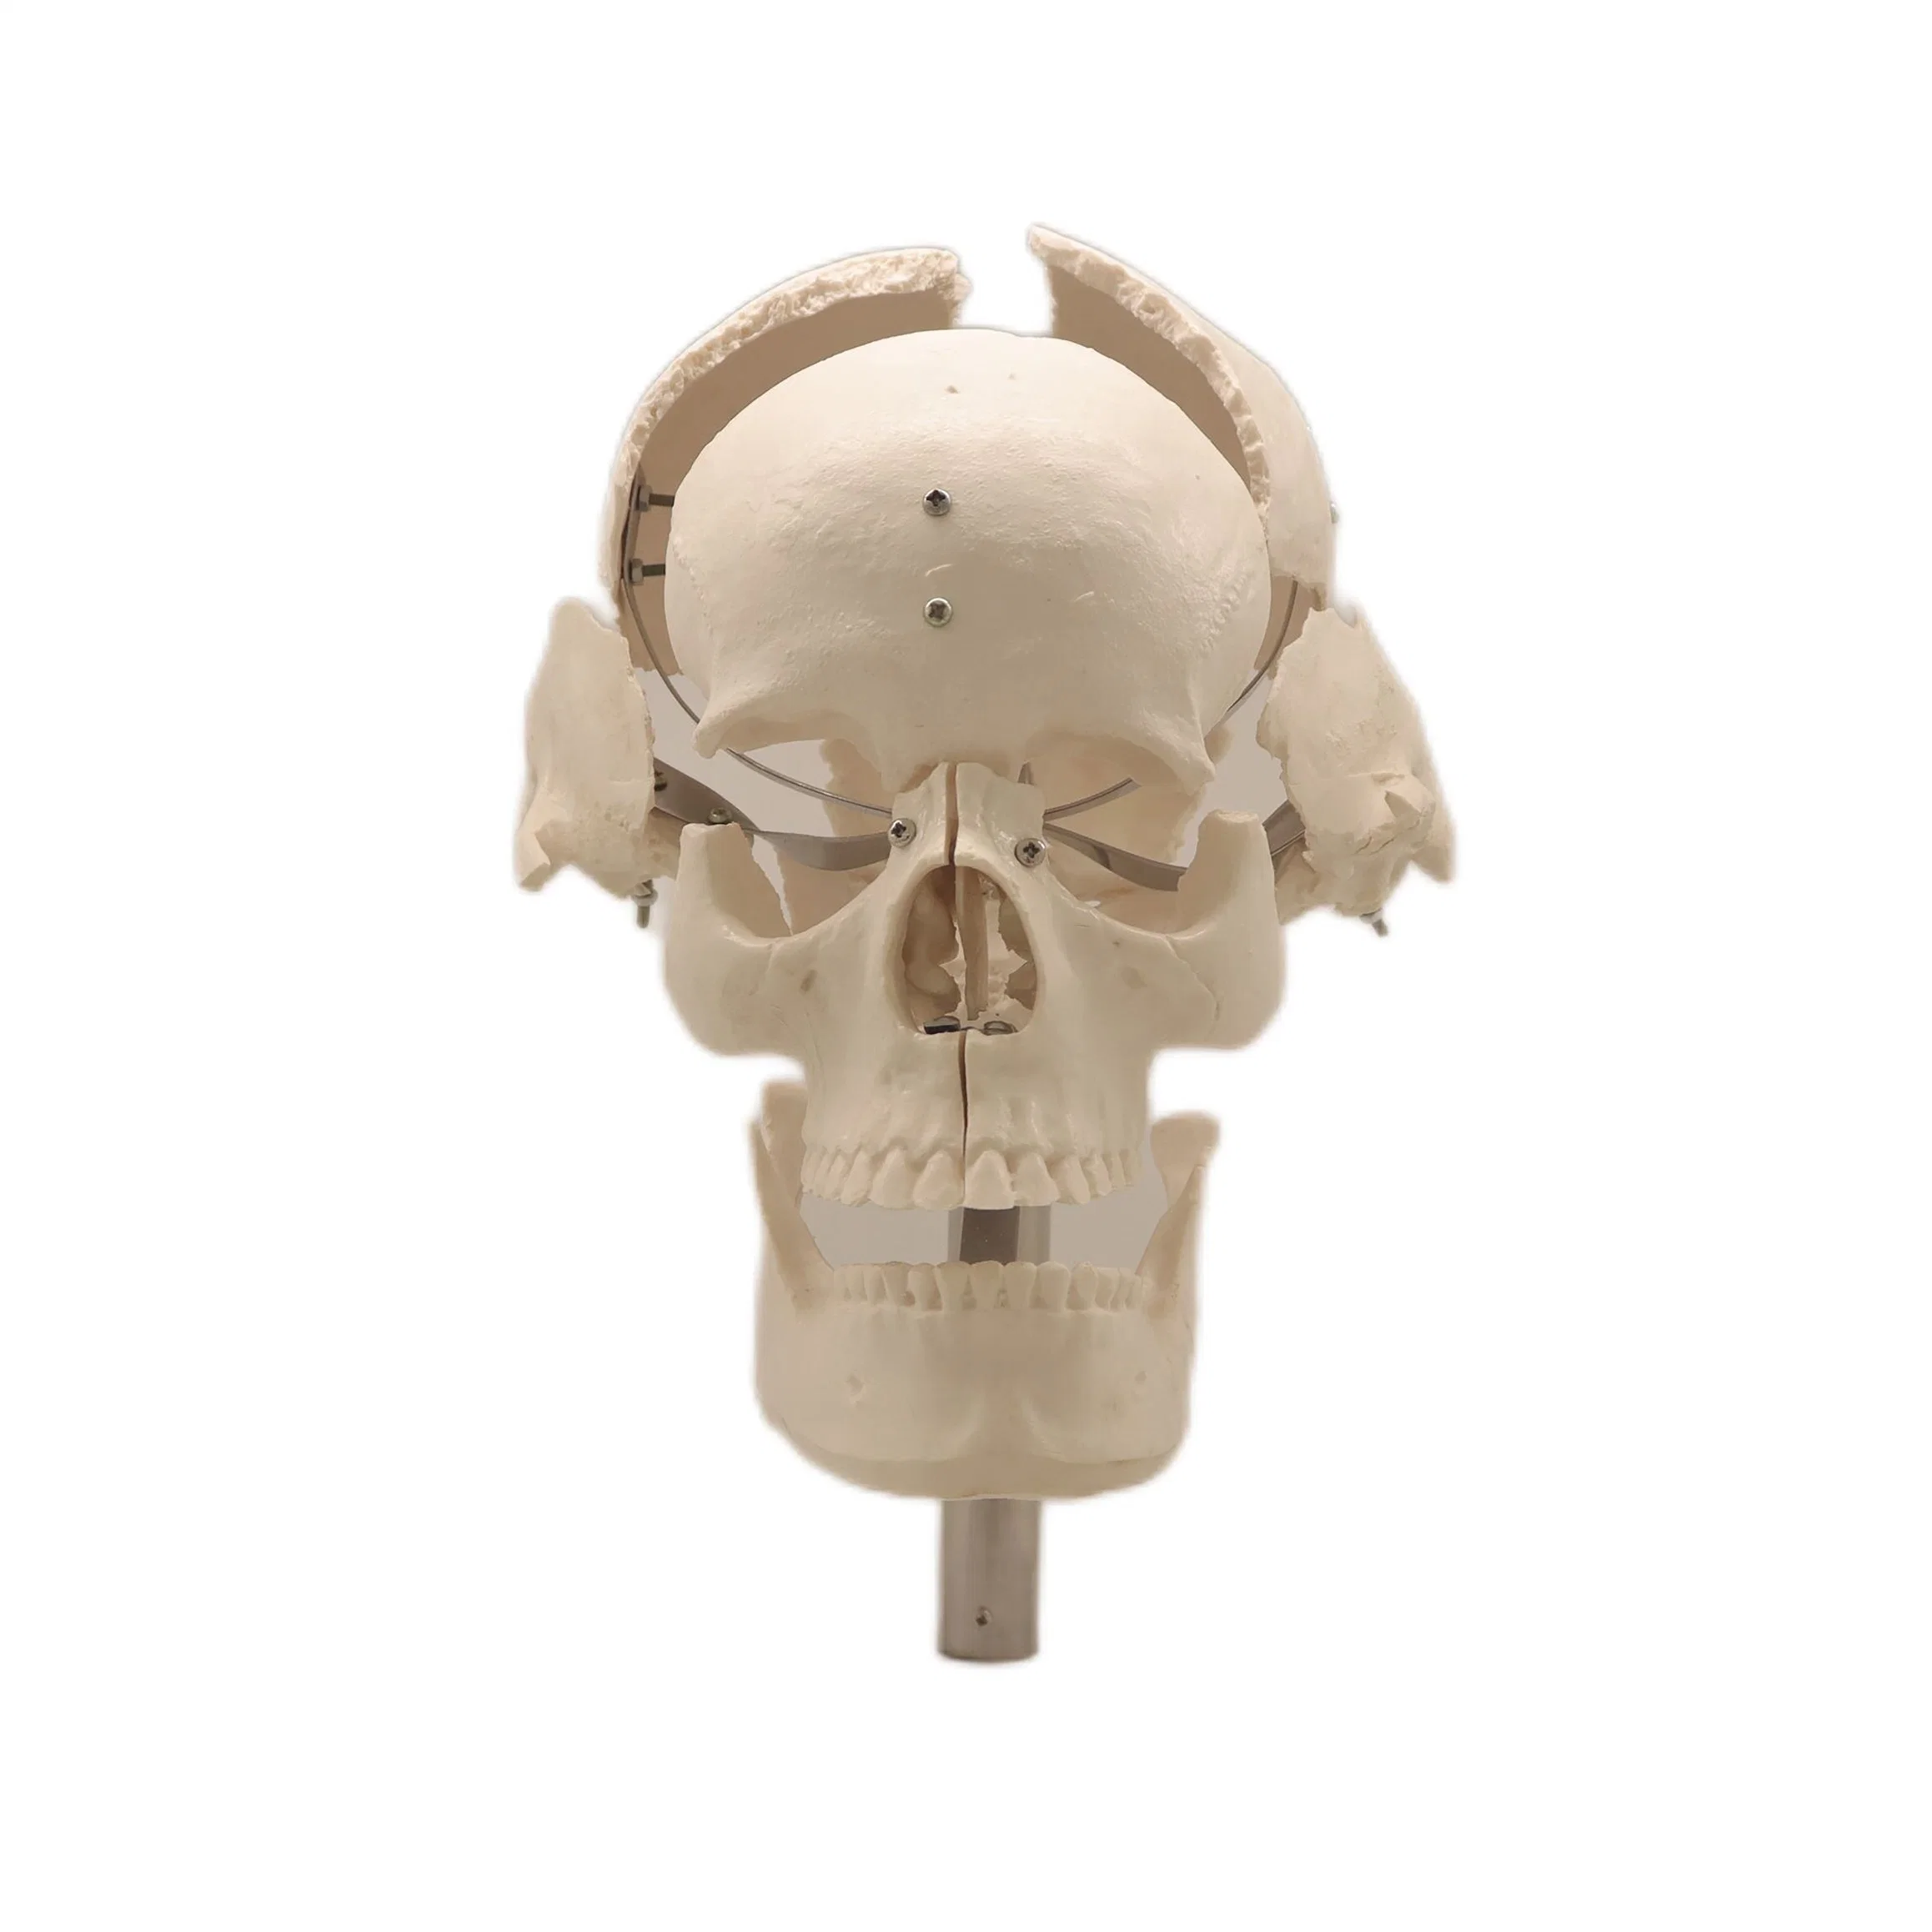 Lab Teaching Models The Separated Human Skull Model of PVC